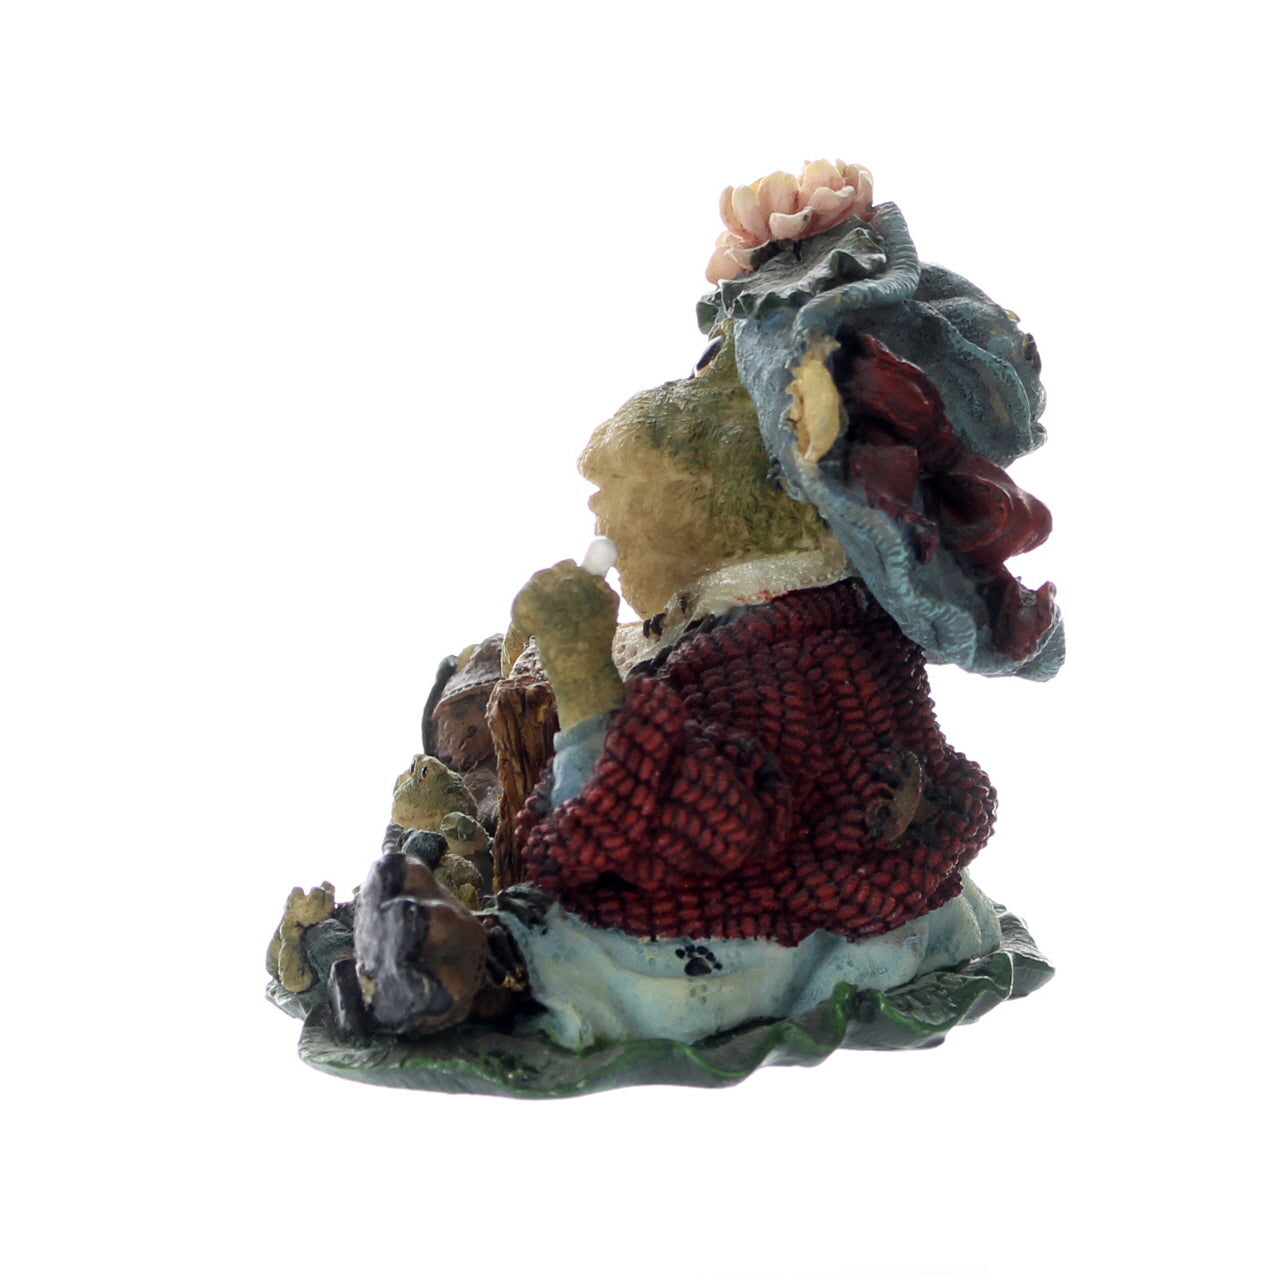 The-Wee-Folkstone-Collection-Resin-Figurine-Ms.-Lilypond-Lesson-Number-One-36705